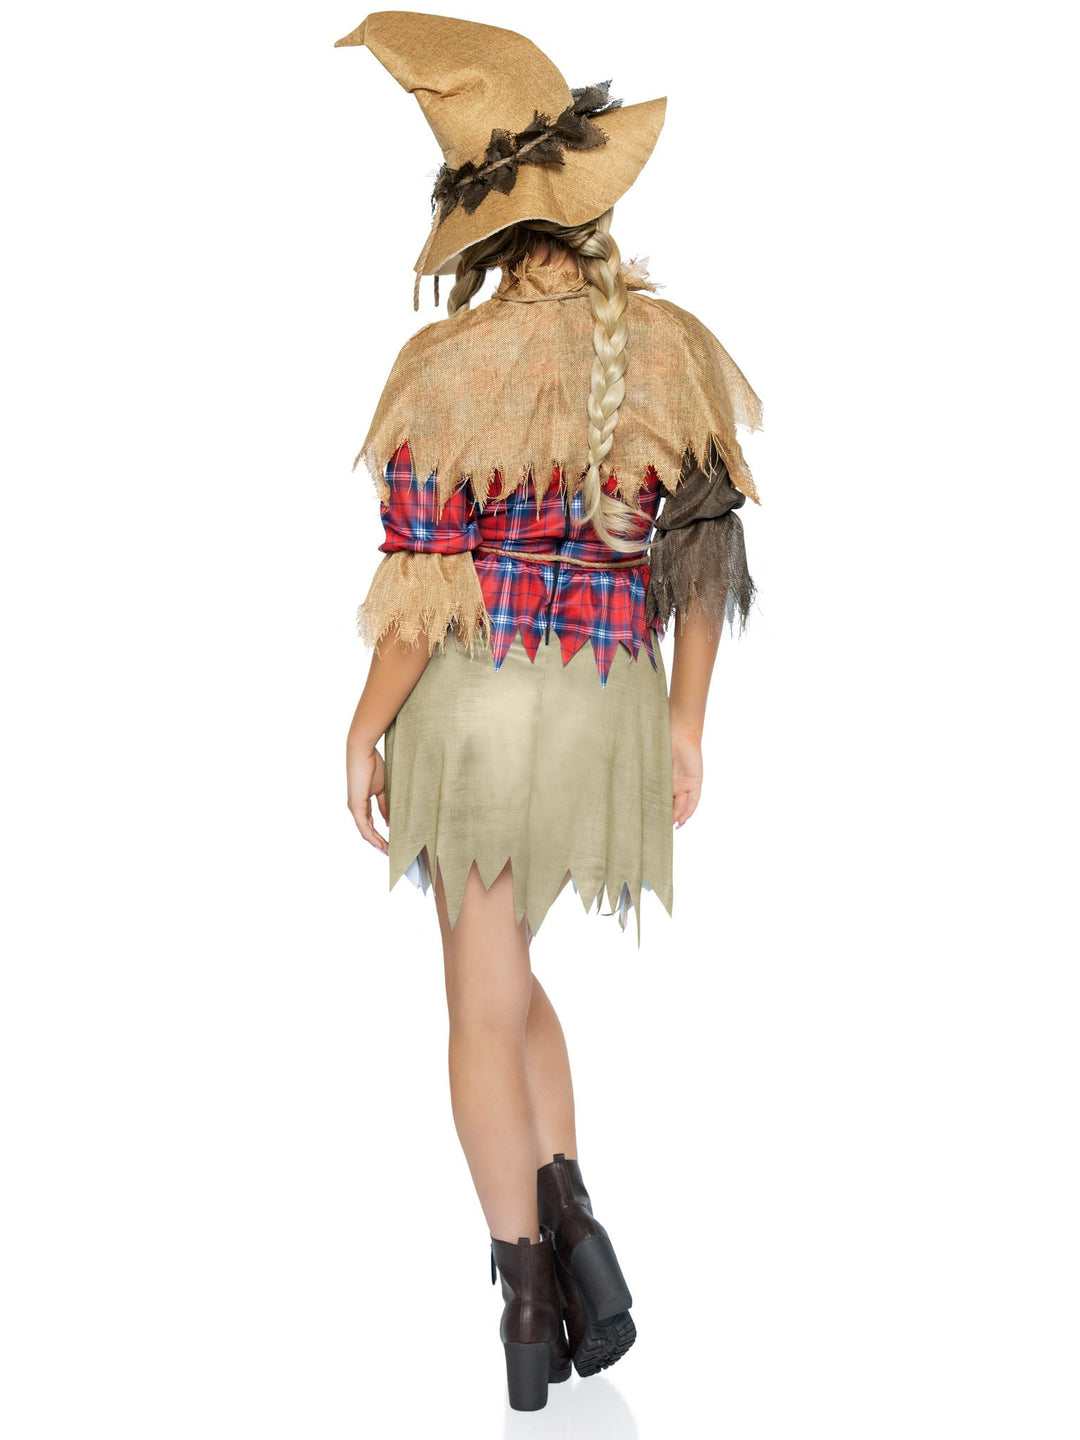 Scarecrow Patchwork Straw Accent Dress with Burlap Shawl and Hat